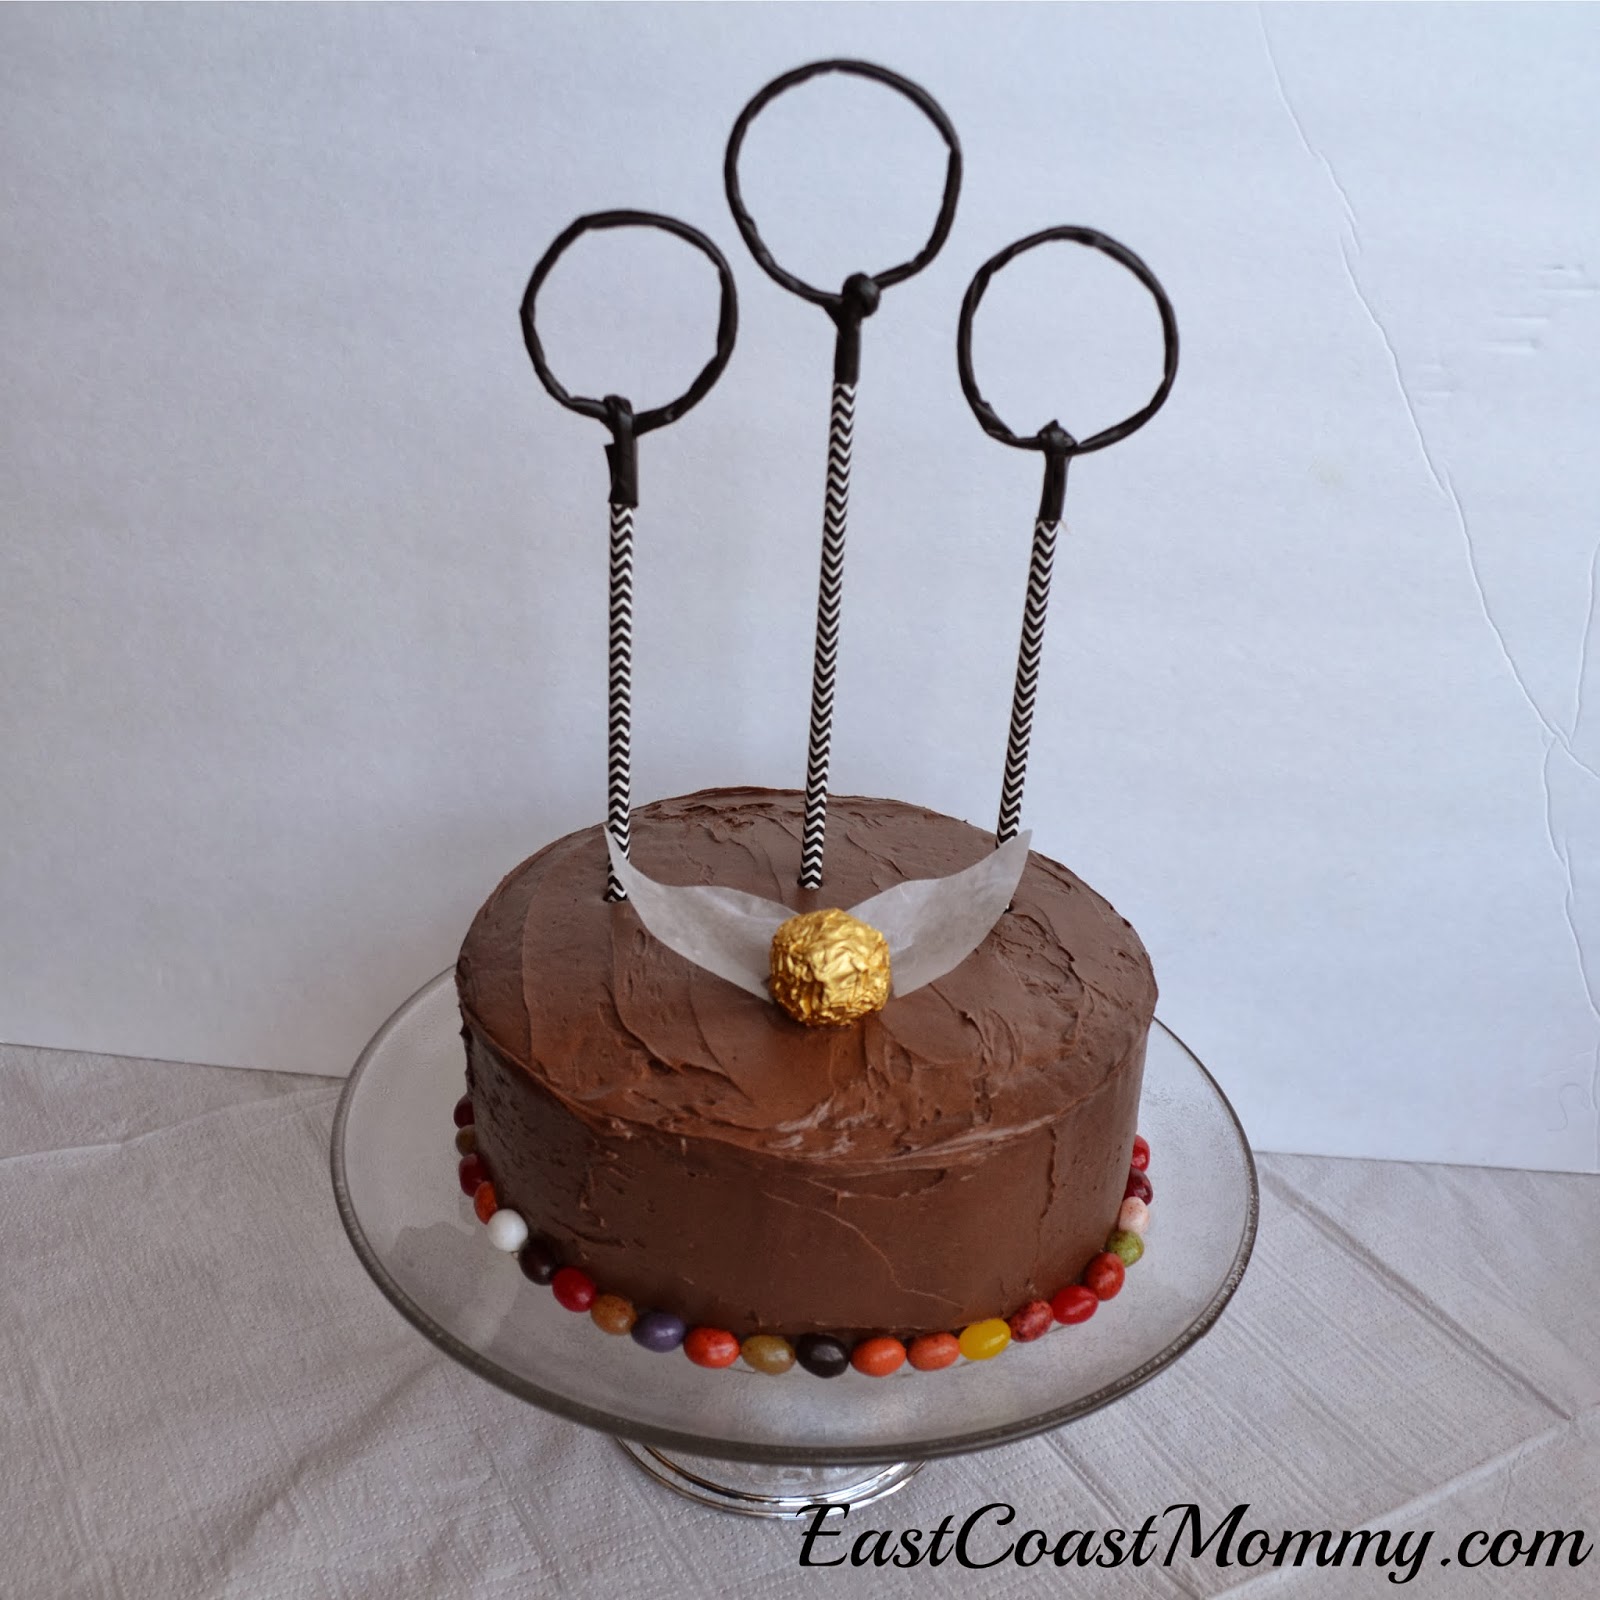 East Coast Mommy: Easy Harry Potter Cakes - Simple+harry+potter+cake